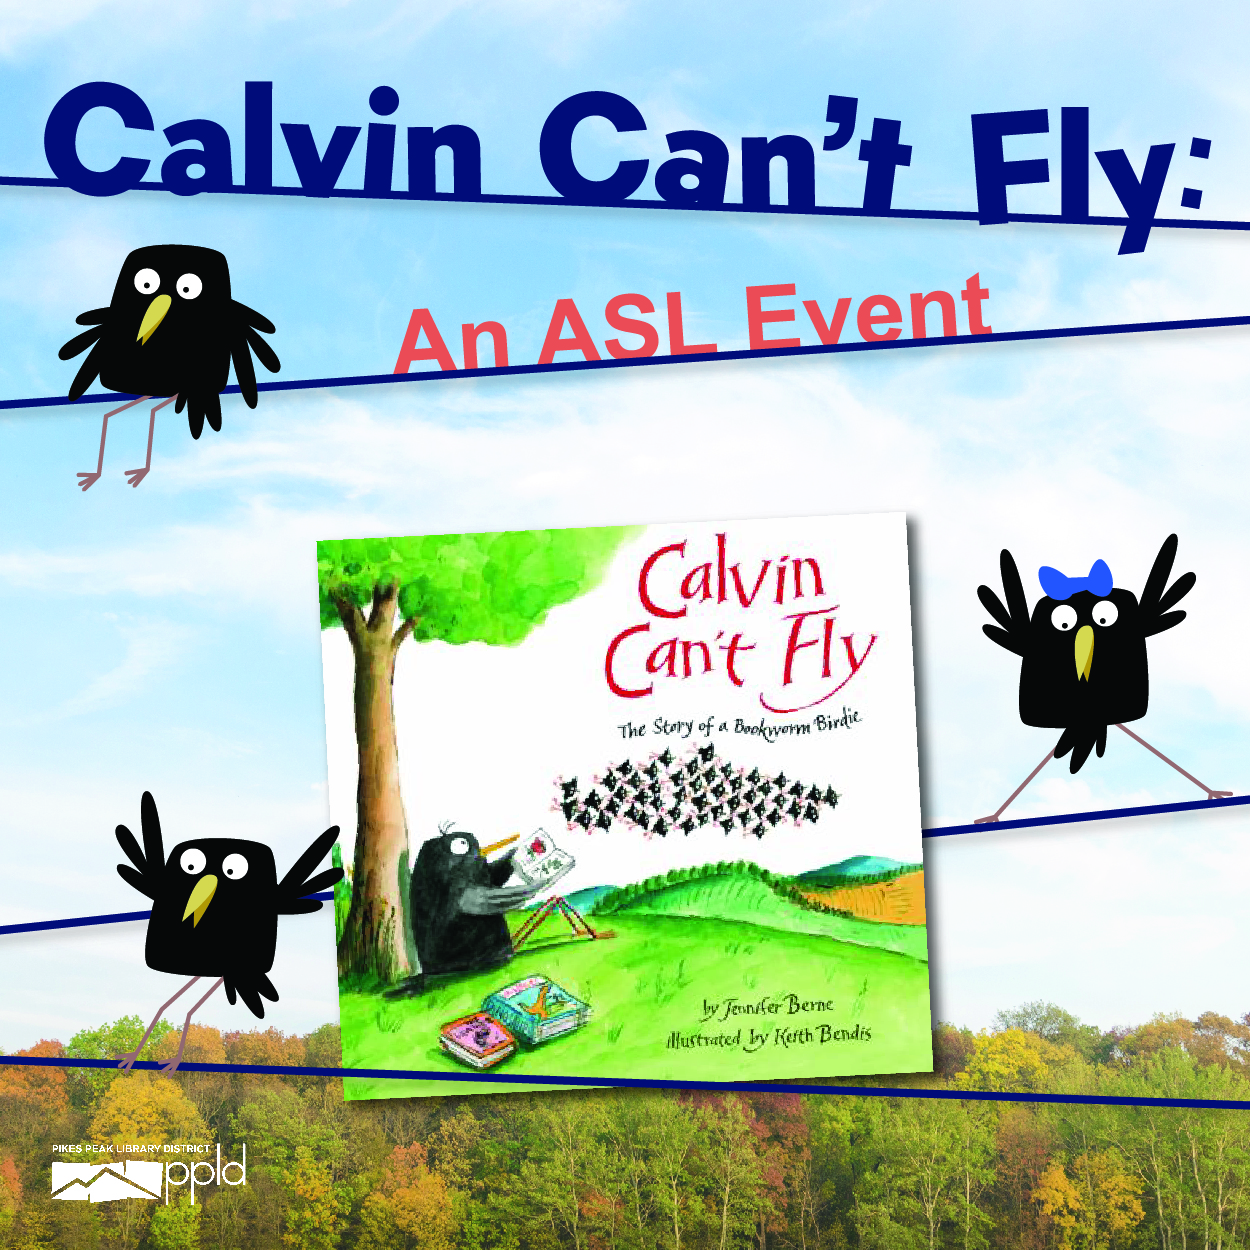 Calvin Can't Fly: An ASL Event